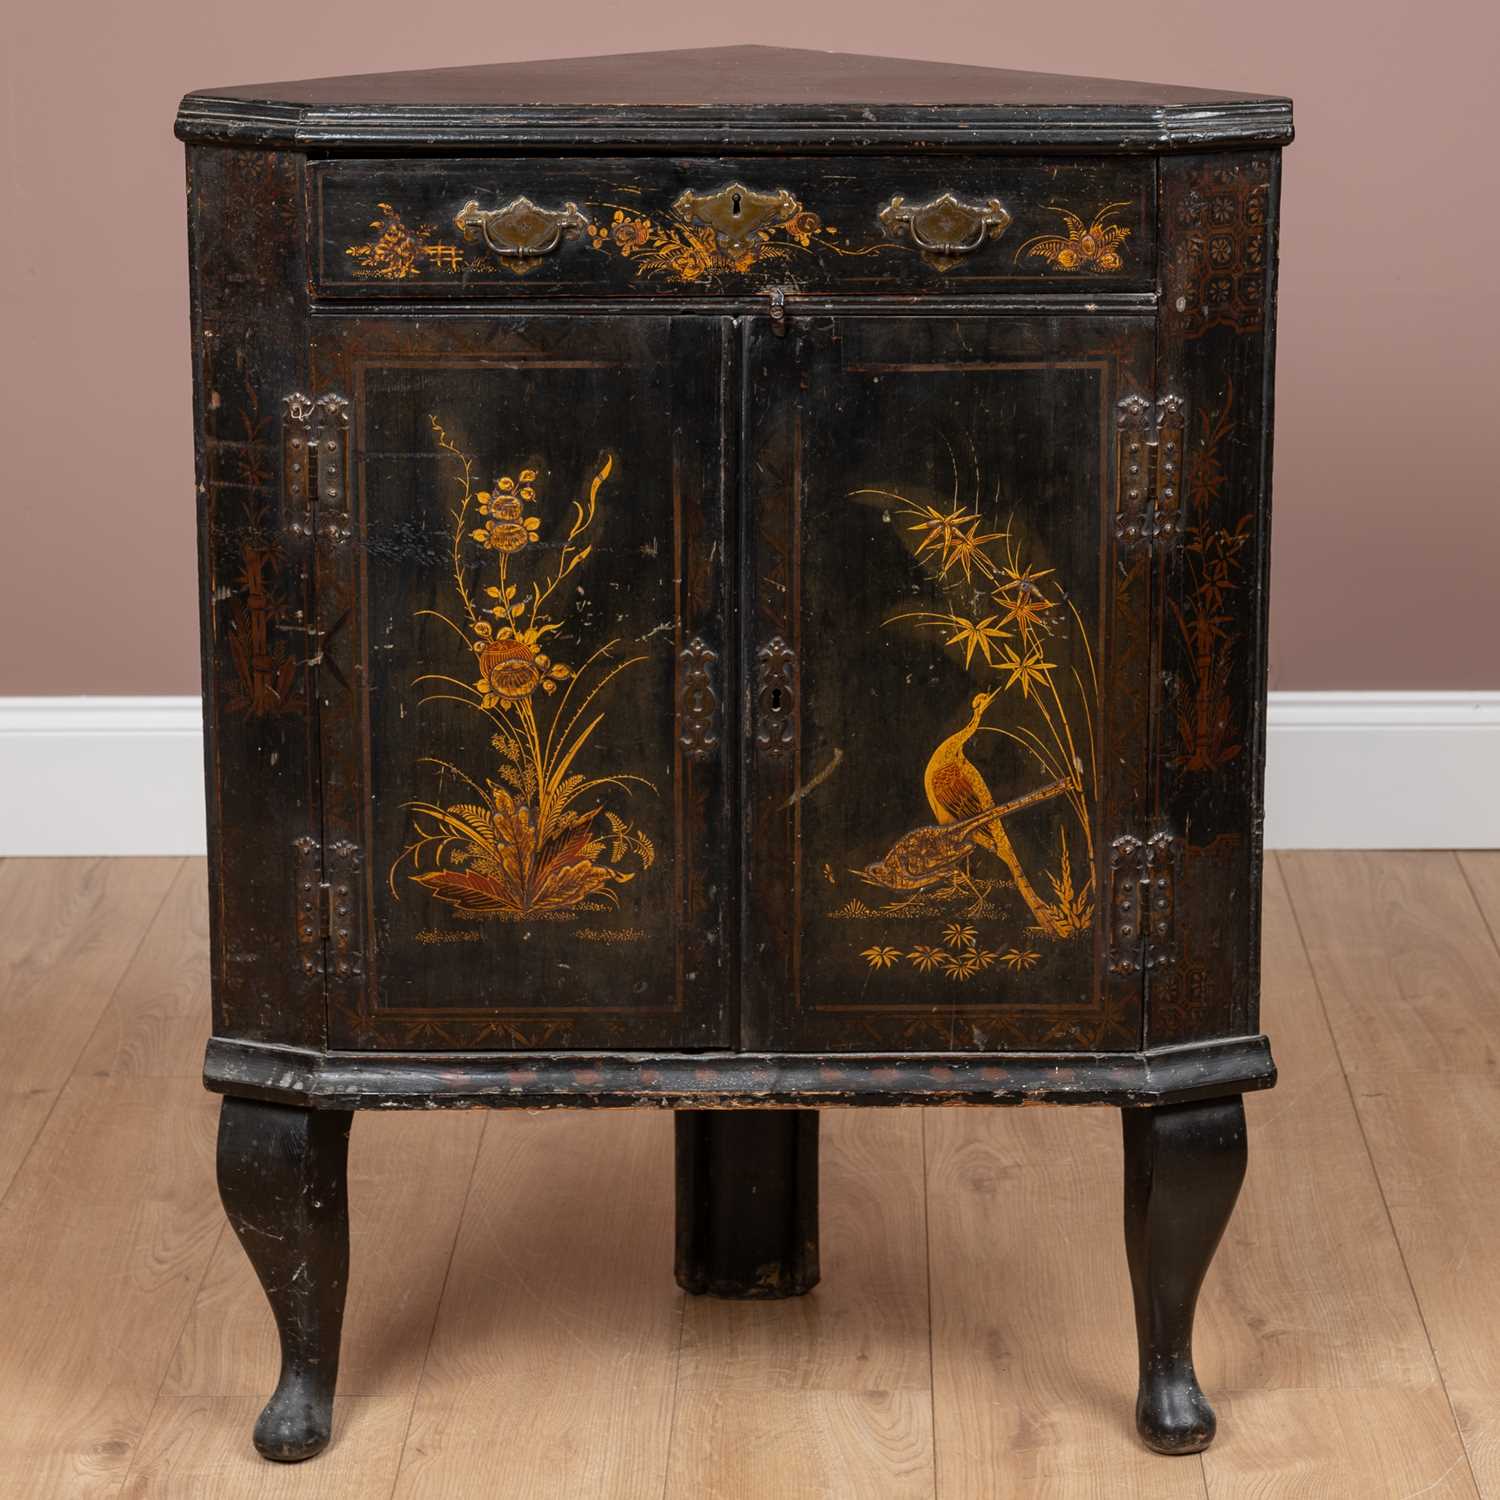 Lot 90 - A lacquered floor standing corner cupboard